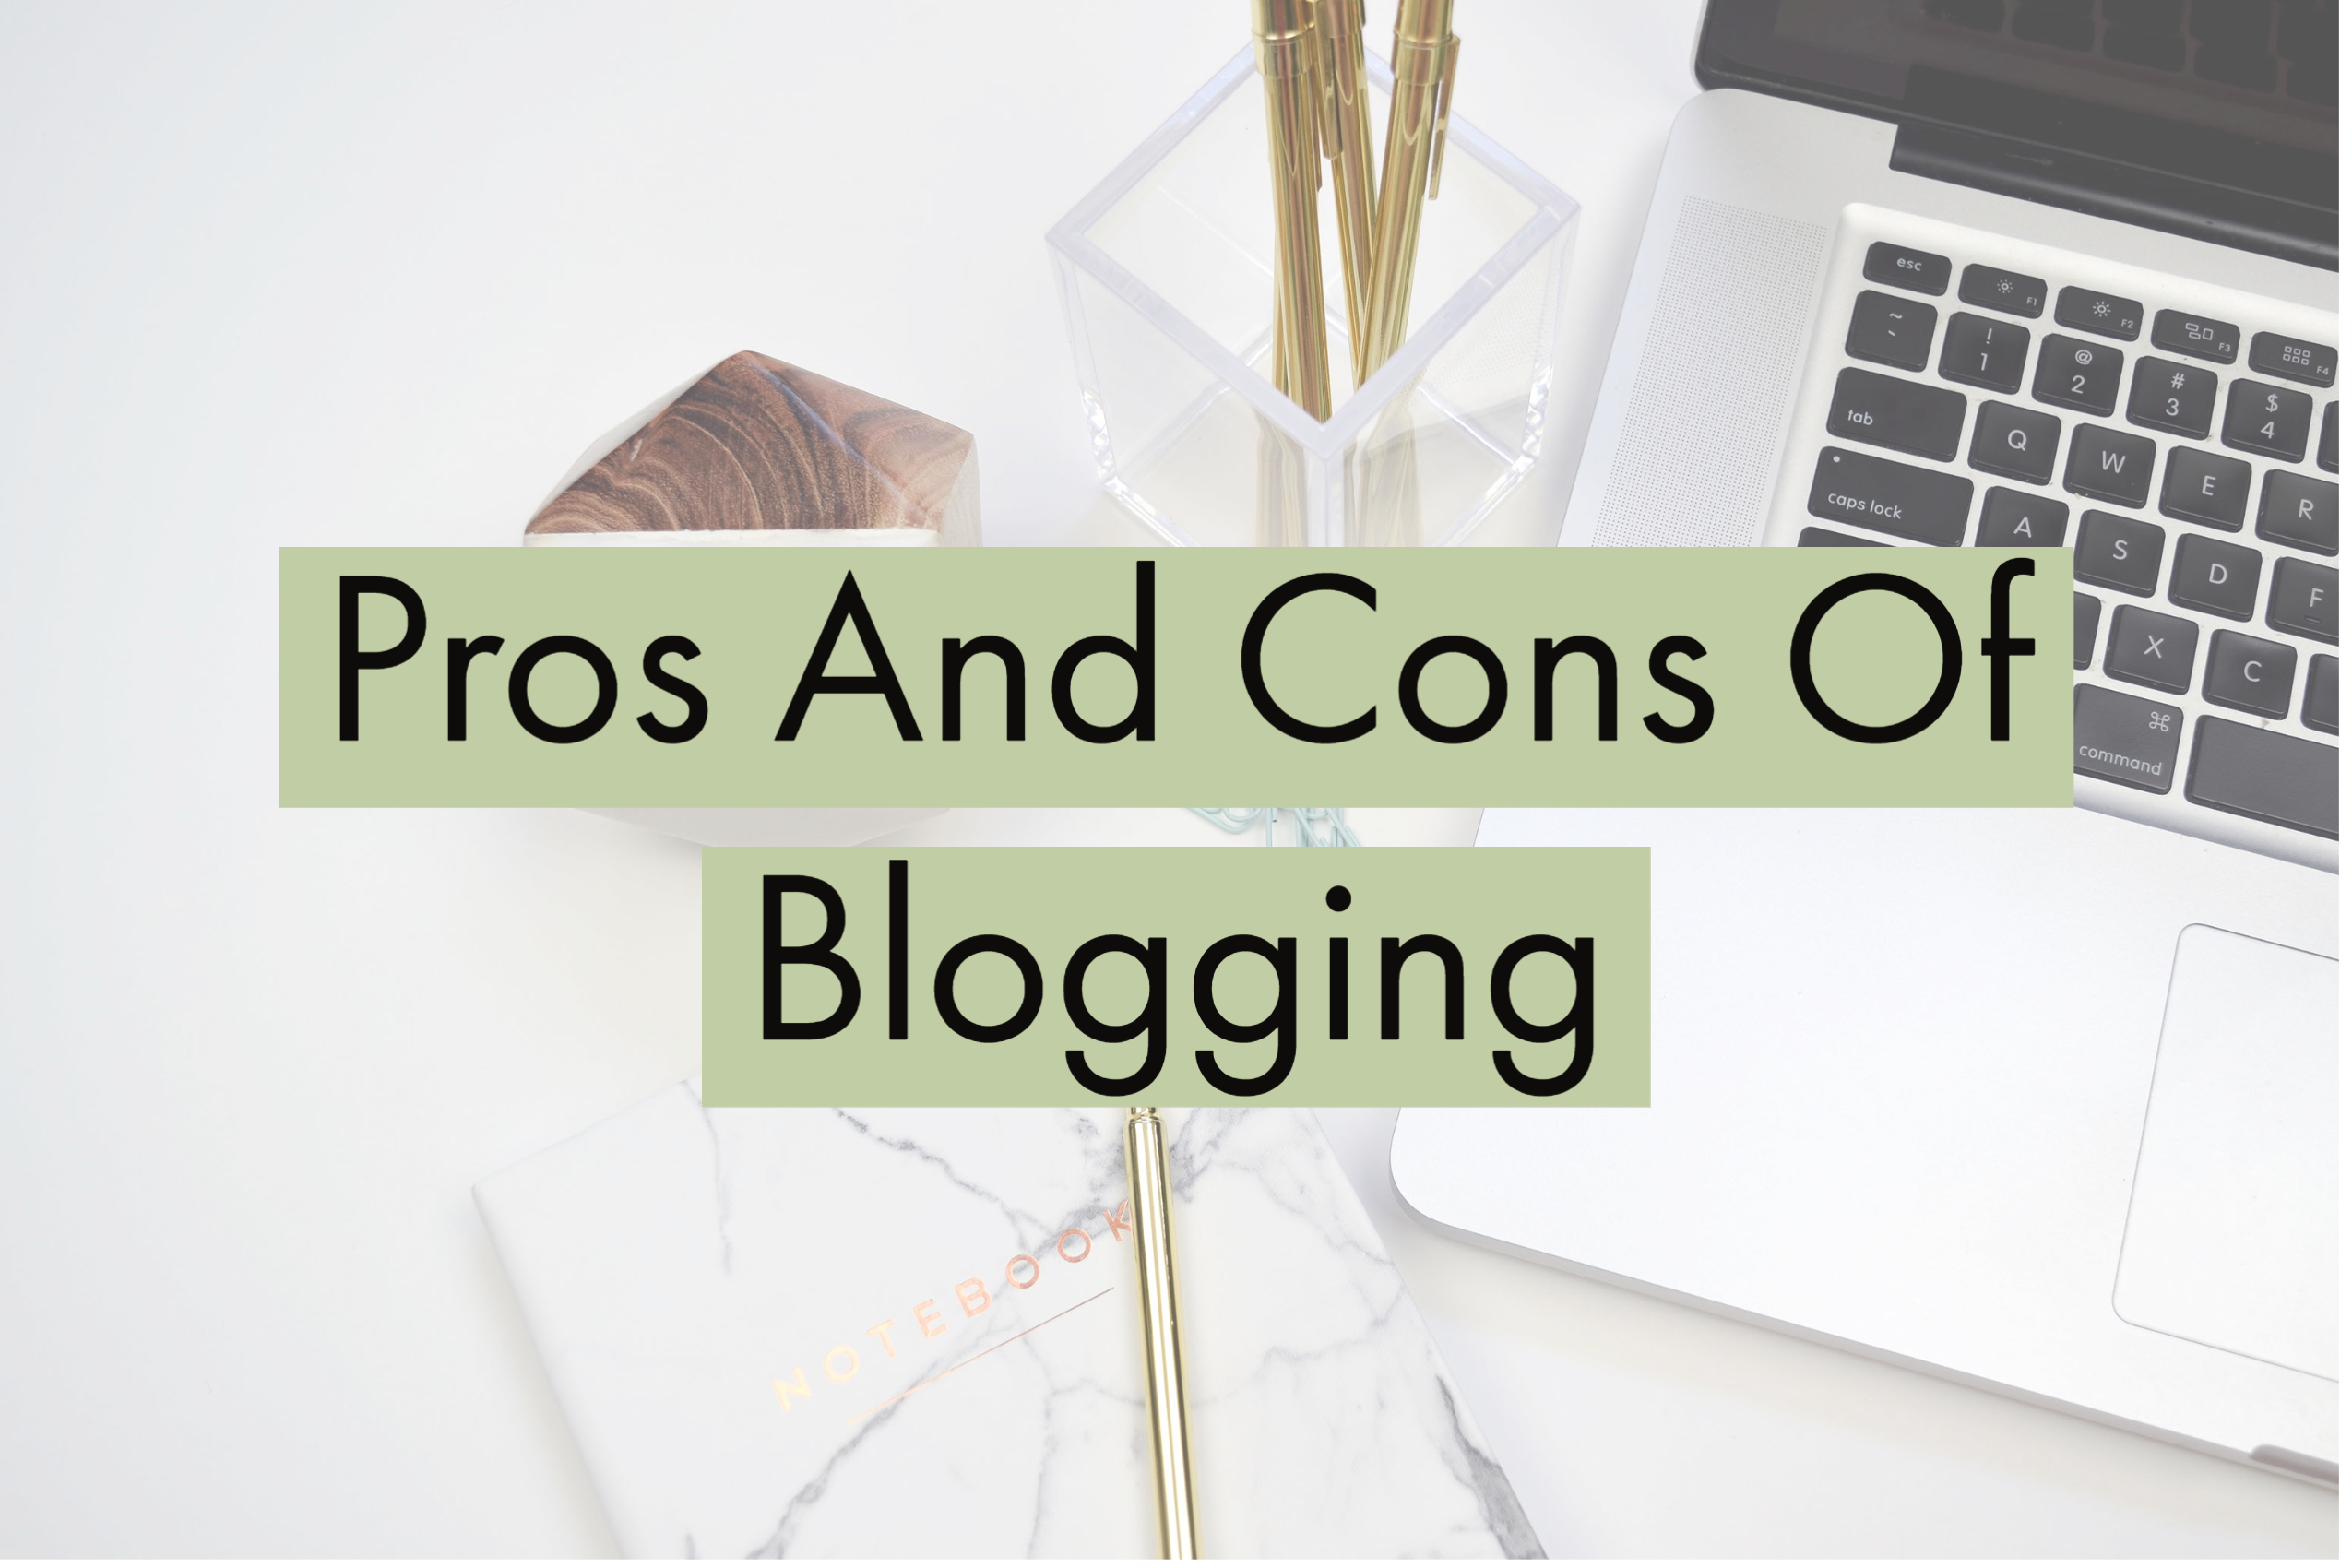 Pros and Cons Of Blogging